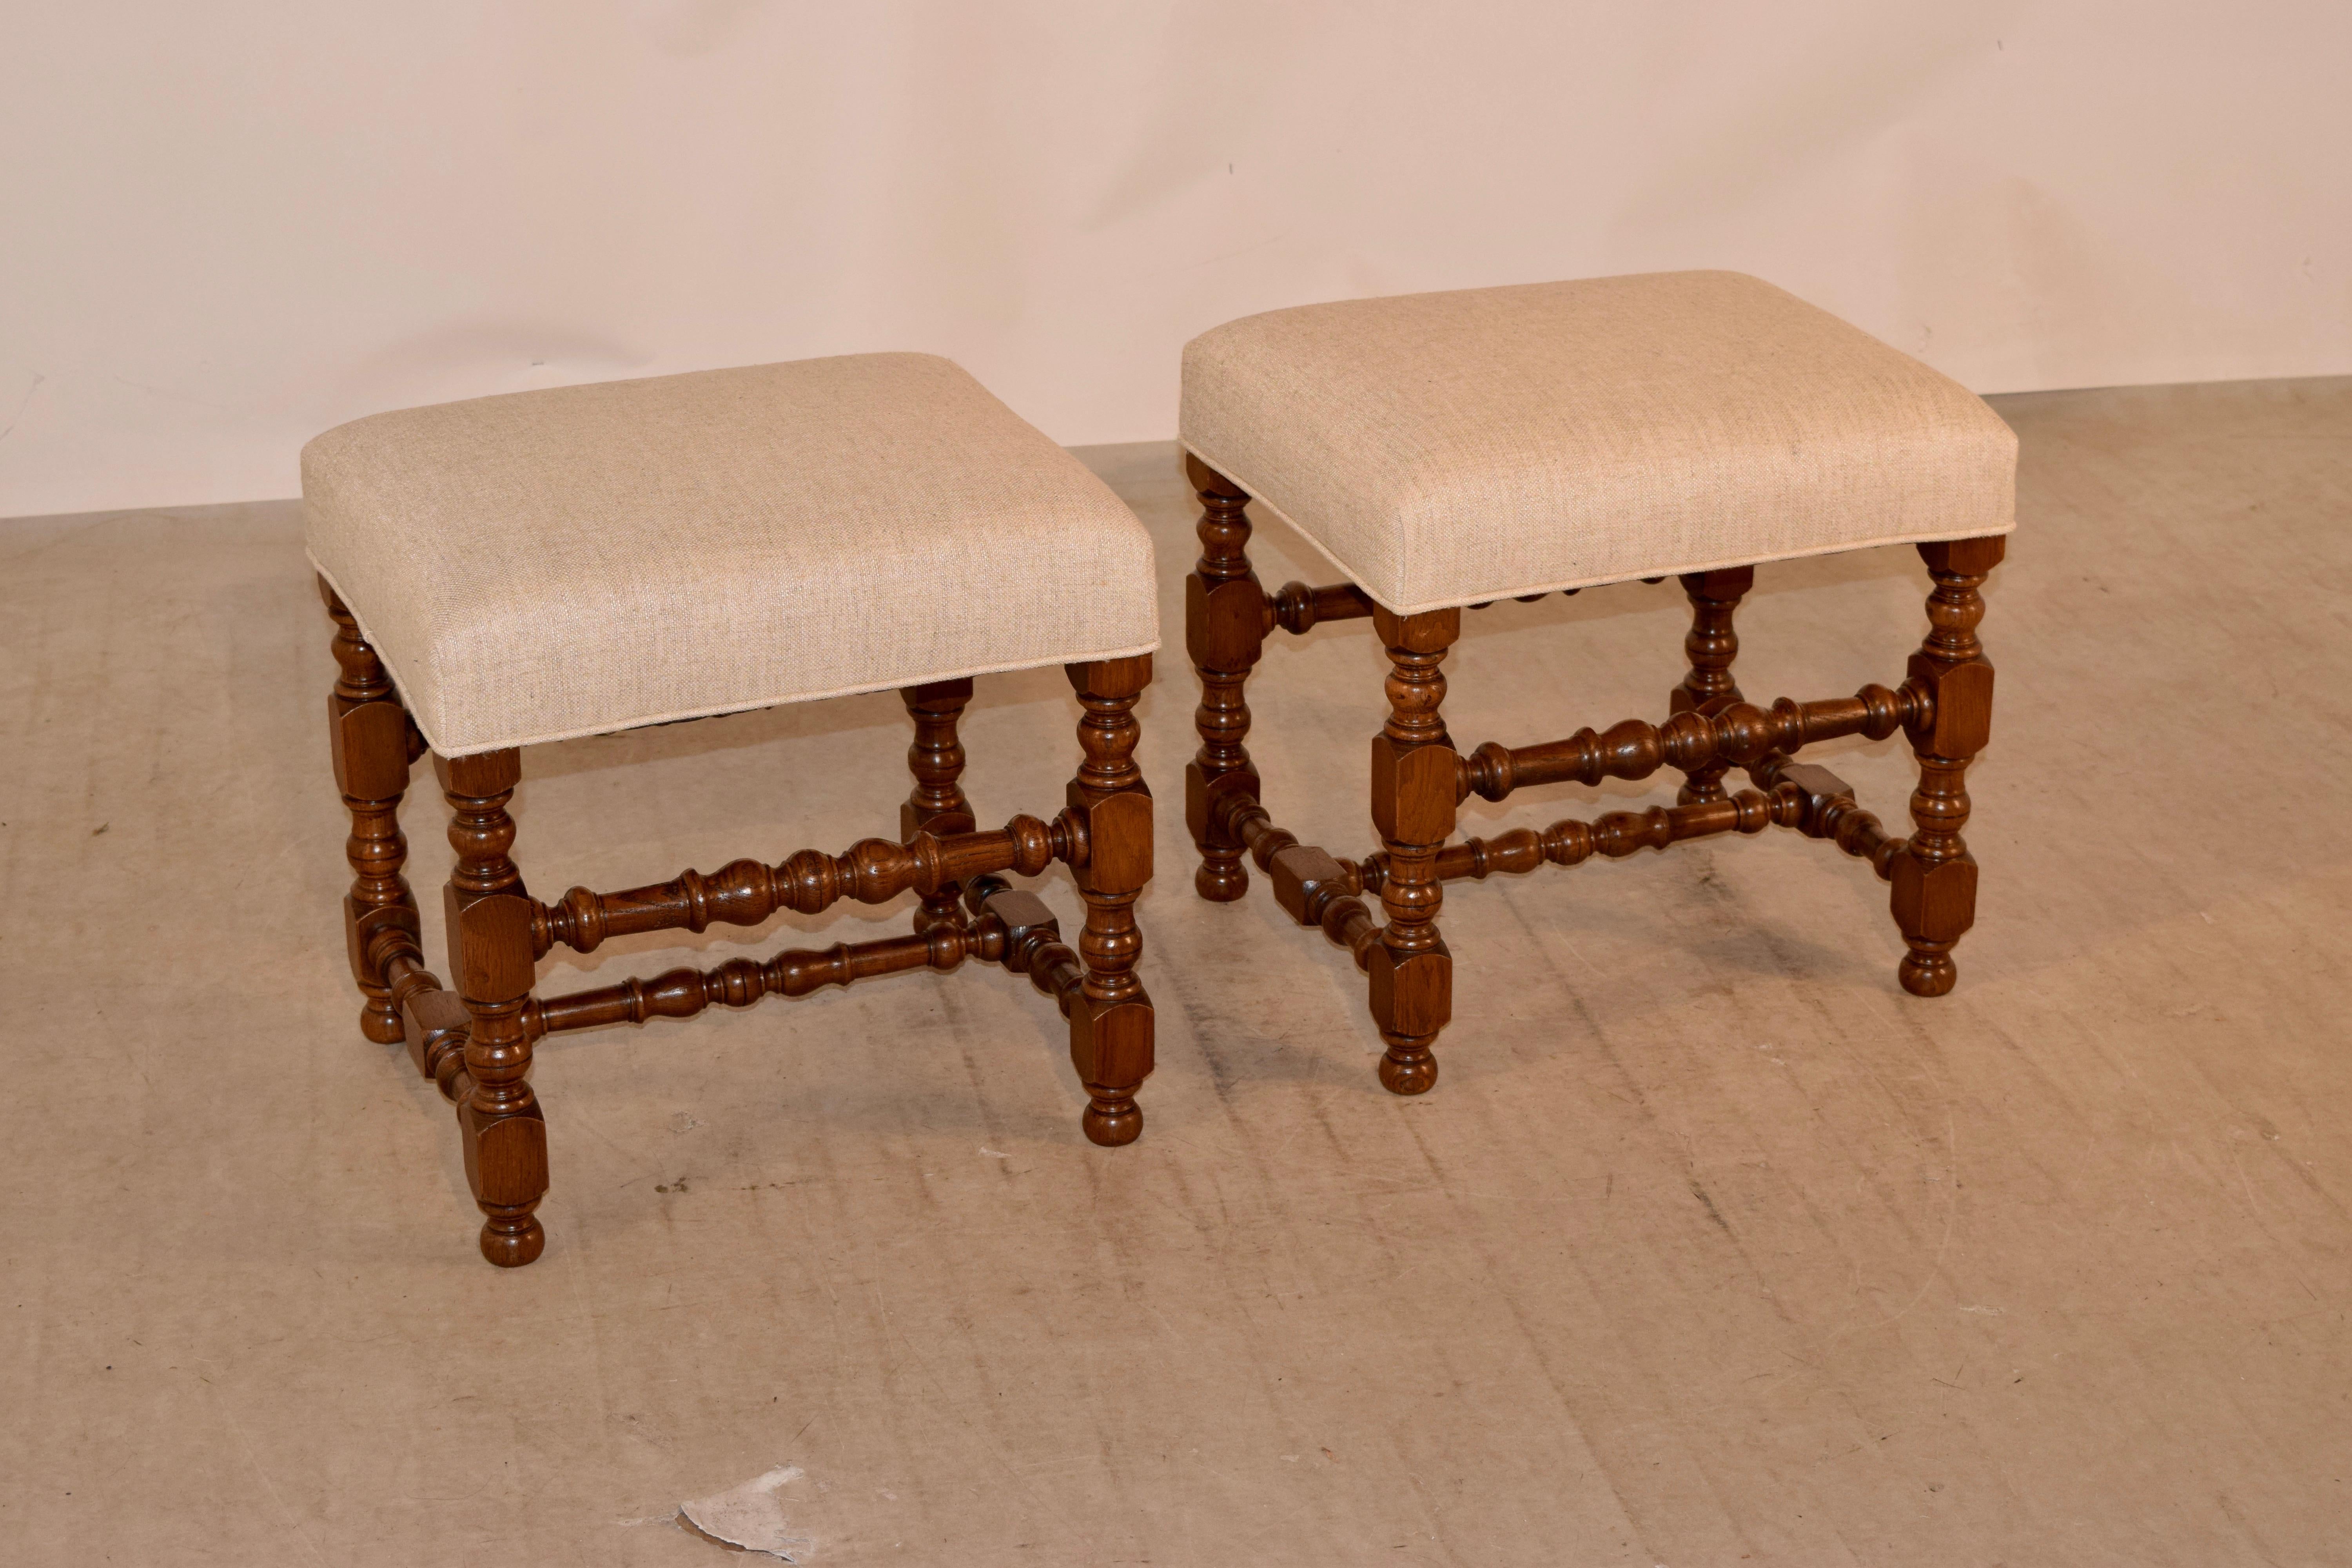 Pair of 19th century oak stools from France with newly upholstered tops in linen finished with a single welt. The frames have hand-turned oak legs, joined by hand-turned stretchers and raised on small bun feet.